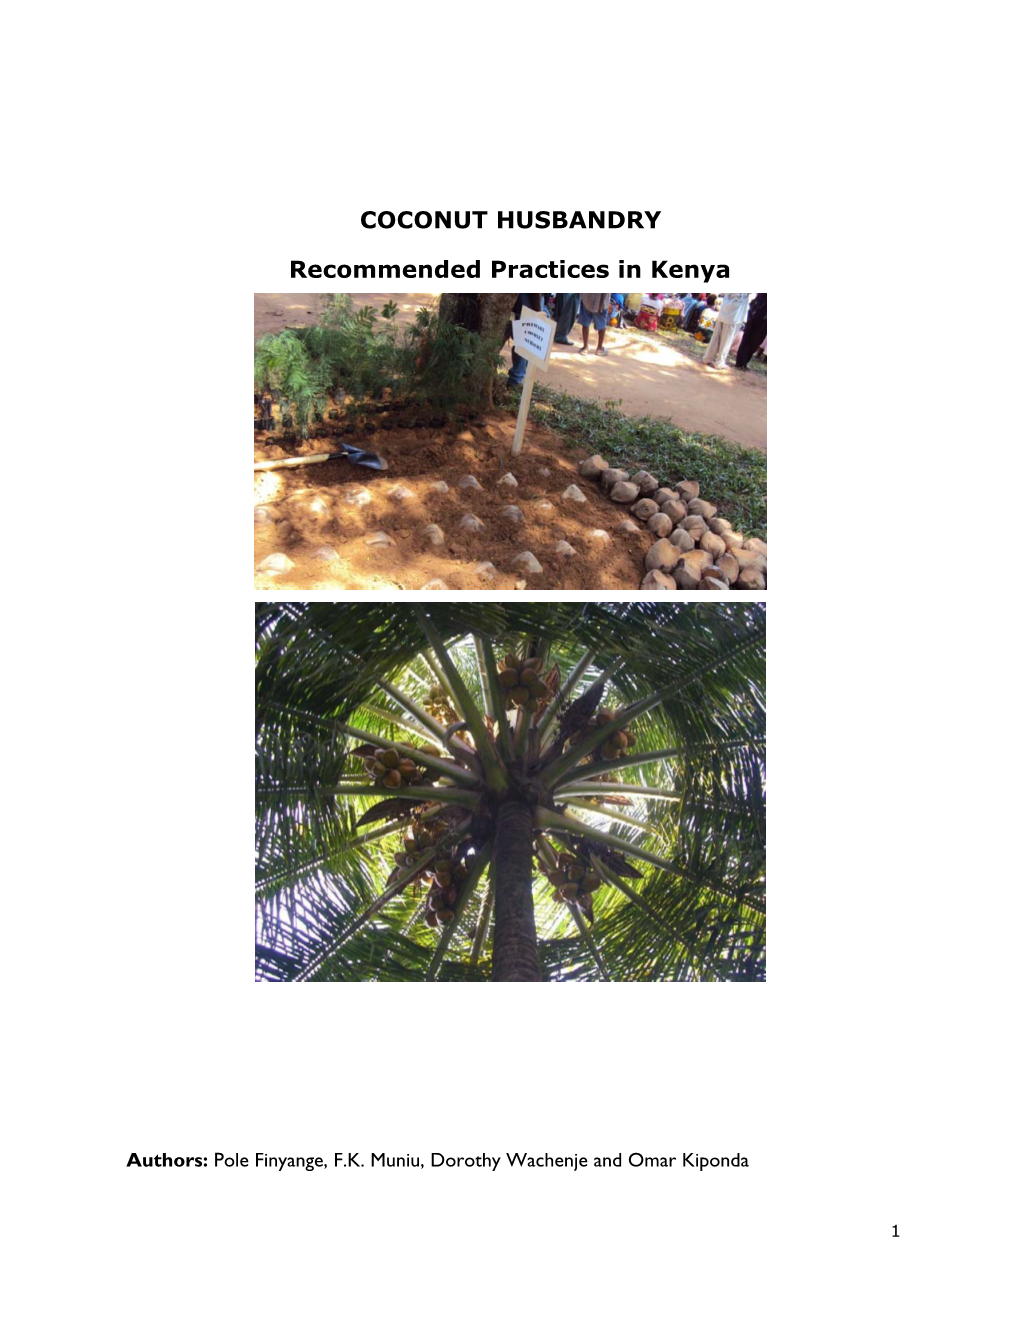 COCONUT HUSBANDRY Recommended Practices in Kenya